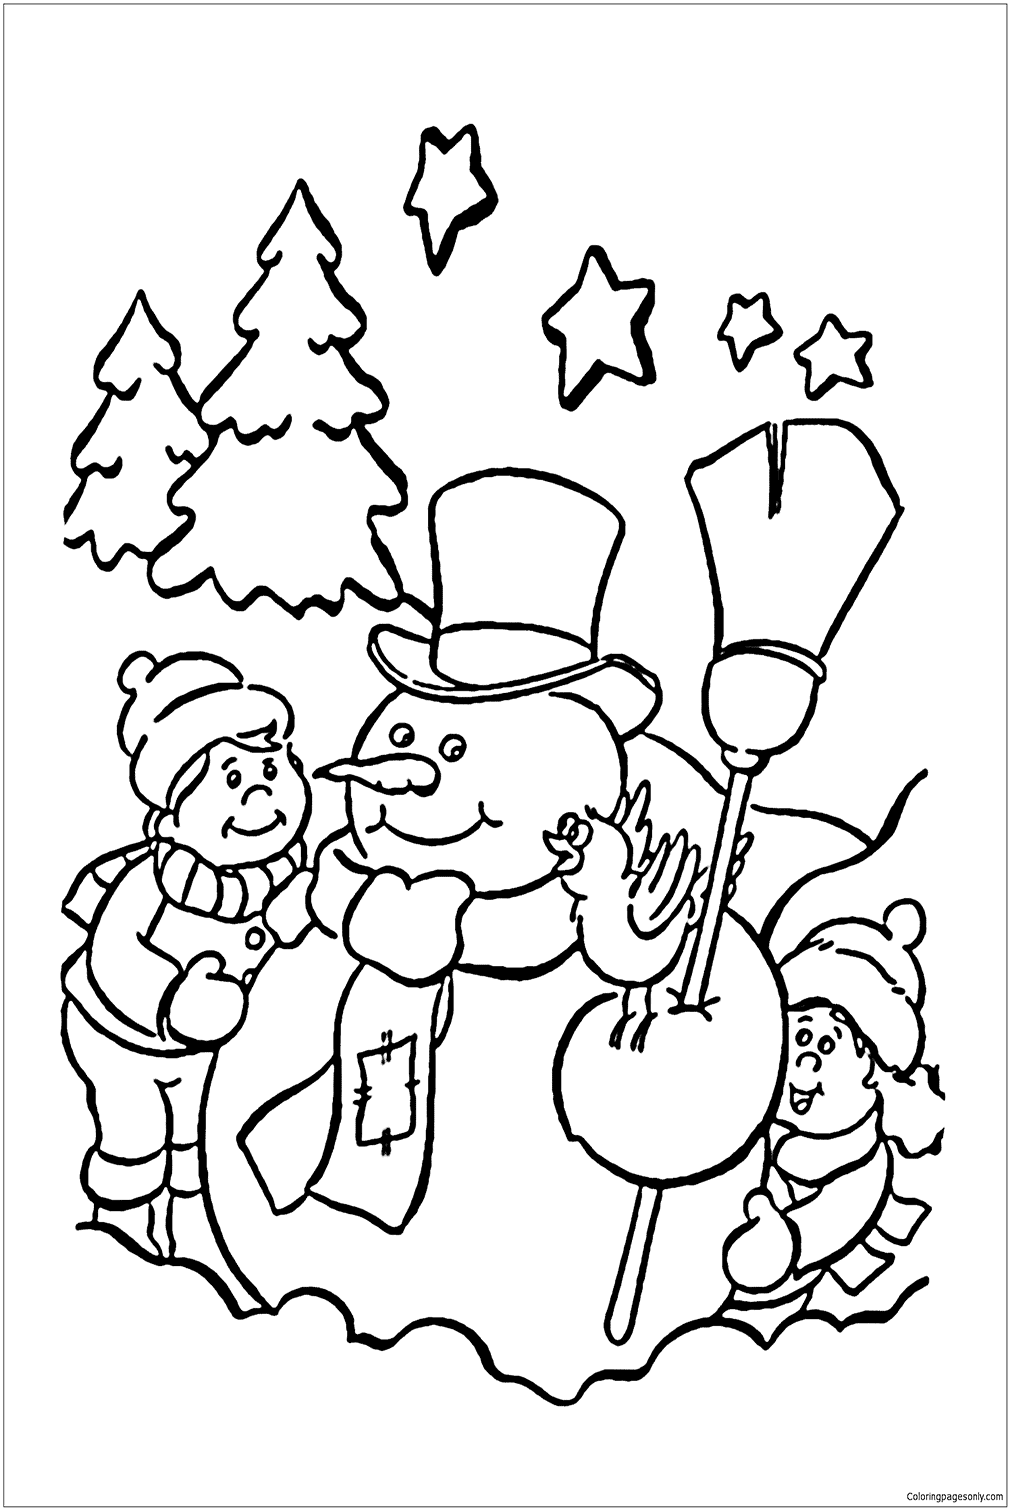 Snowman and Children Coloring Pages